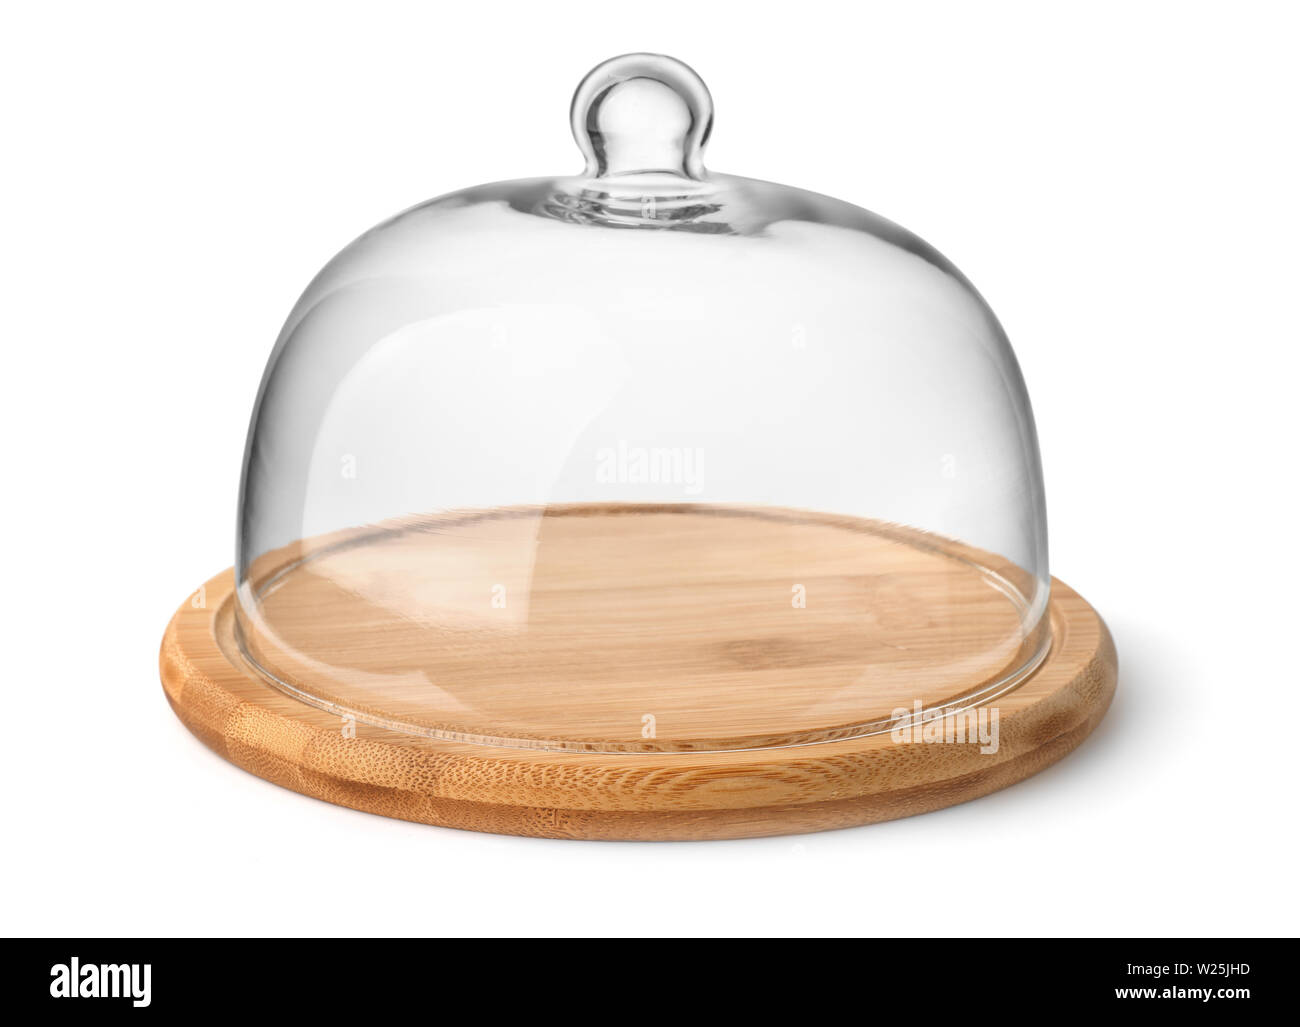 Wooden cheese board and glass dome isolated on white Stock Photo